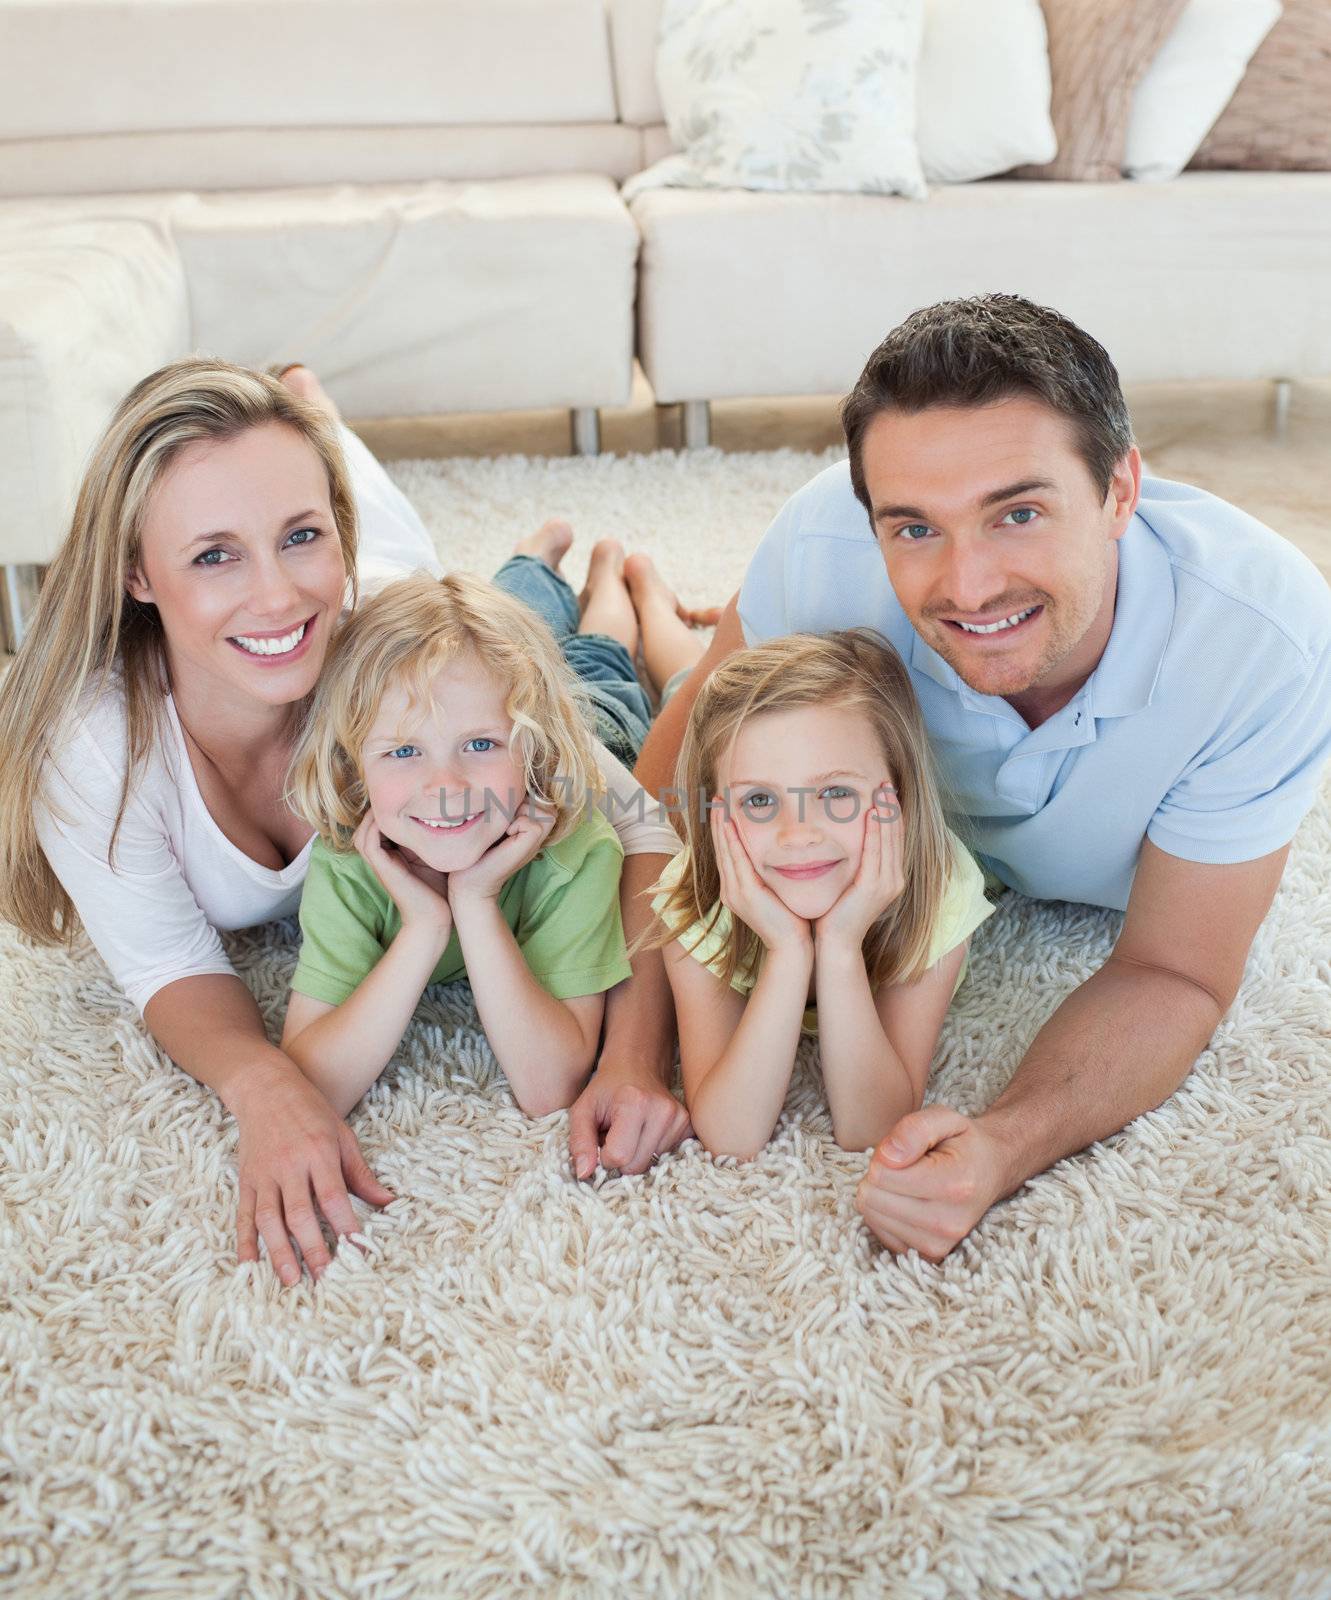 Happy family together on the floor